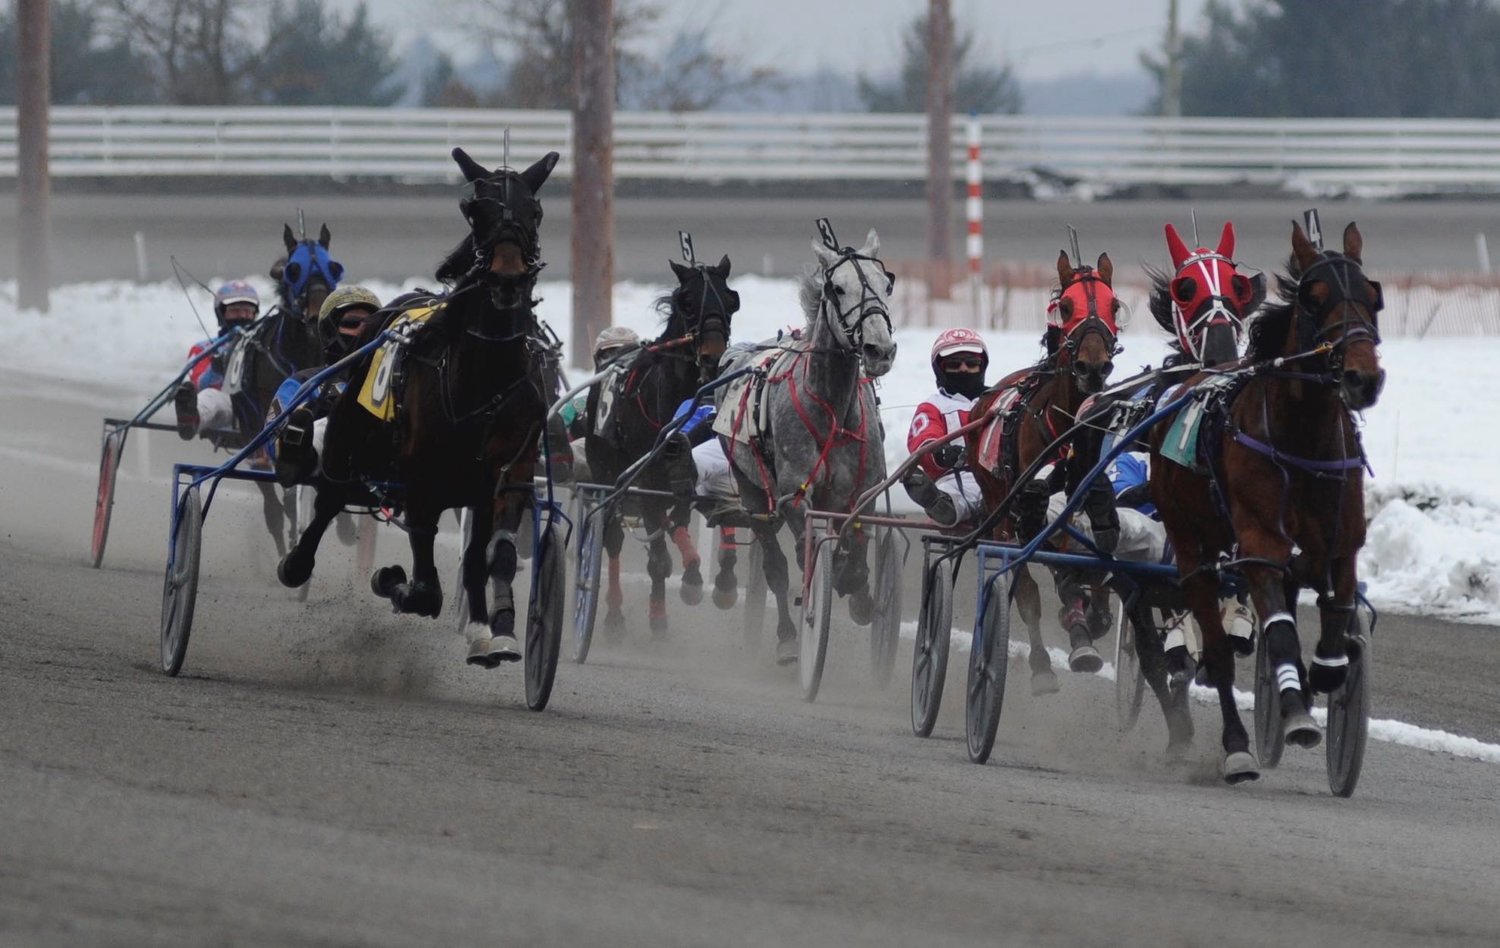 And they’re off! Pictured is the start of the third race, a one-mile pace, with a purse of $5,600 at “The Mighty M” on January 12, 2021.